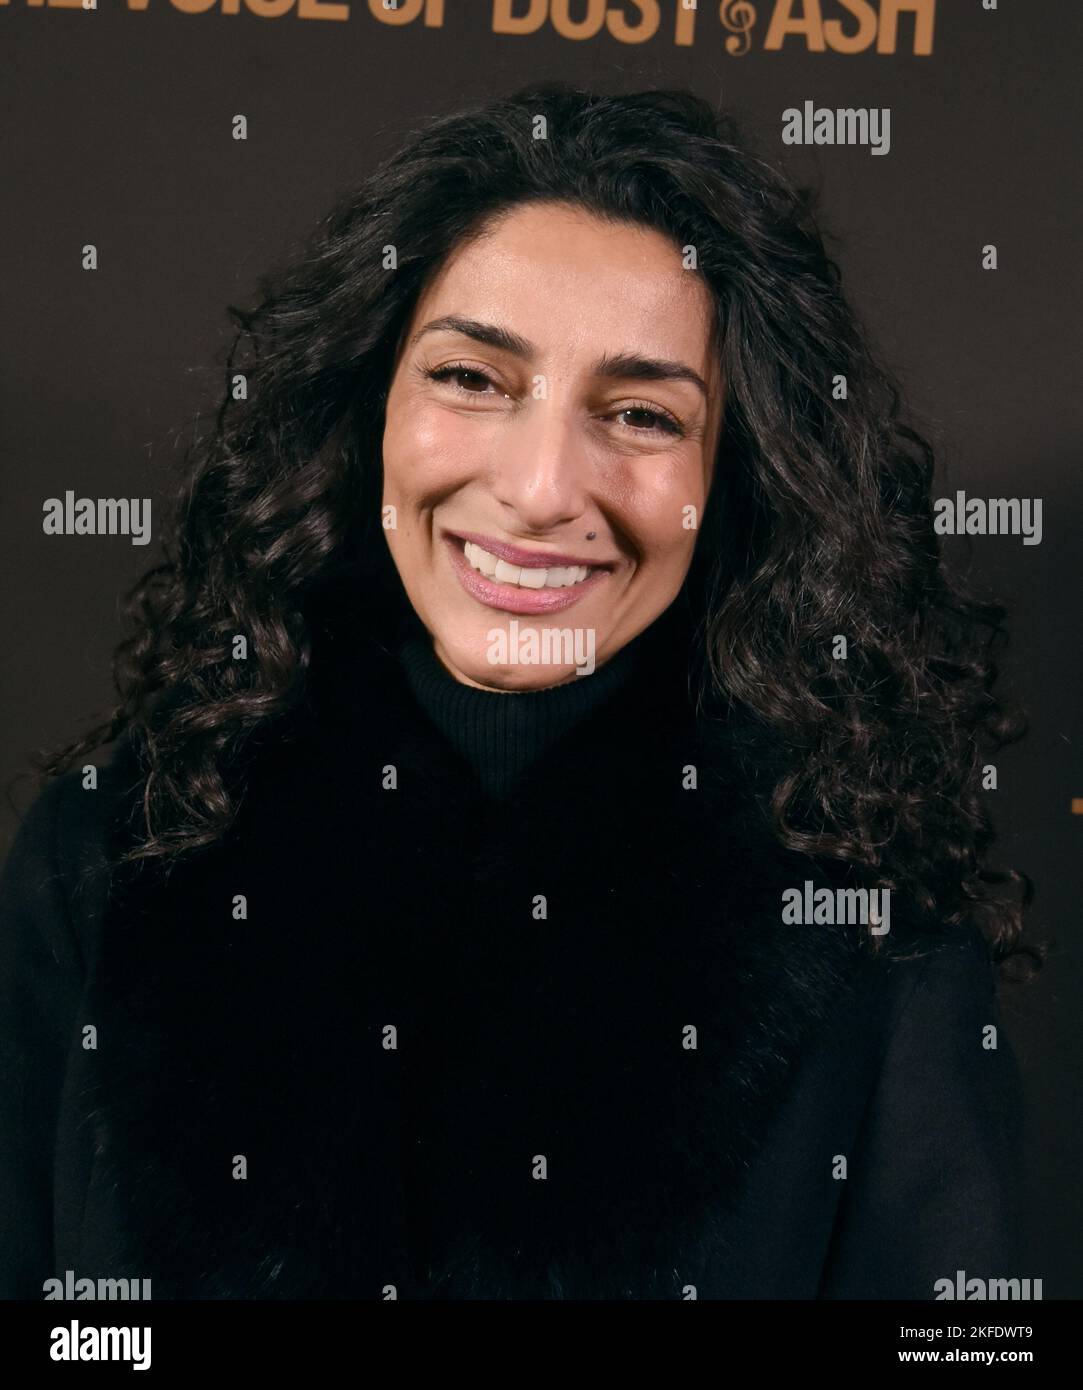 Los Angeles, California, USA 17th November 2022 Necar Zadegan attends the Los Angeles Premiere of 'The Voice of Dust and Ash' at Pacific Design Center on November 17, 2022 in los Angeles, California, USA. Photo by Barry King/Alamy Live News Stock Photo